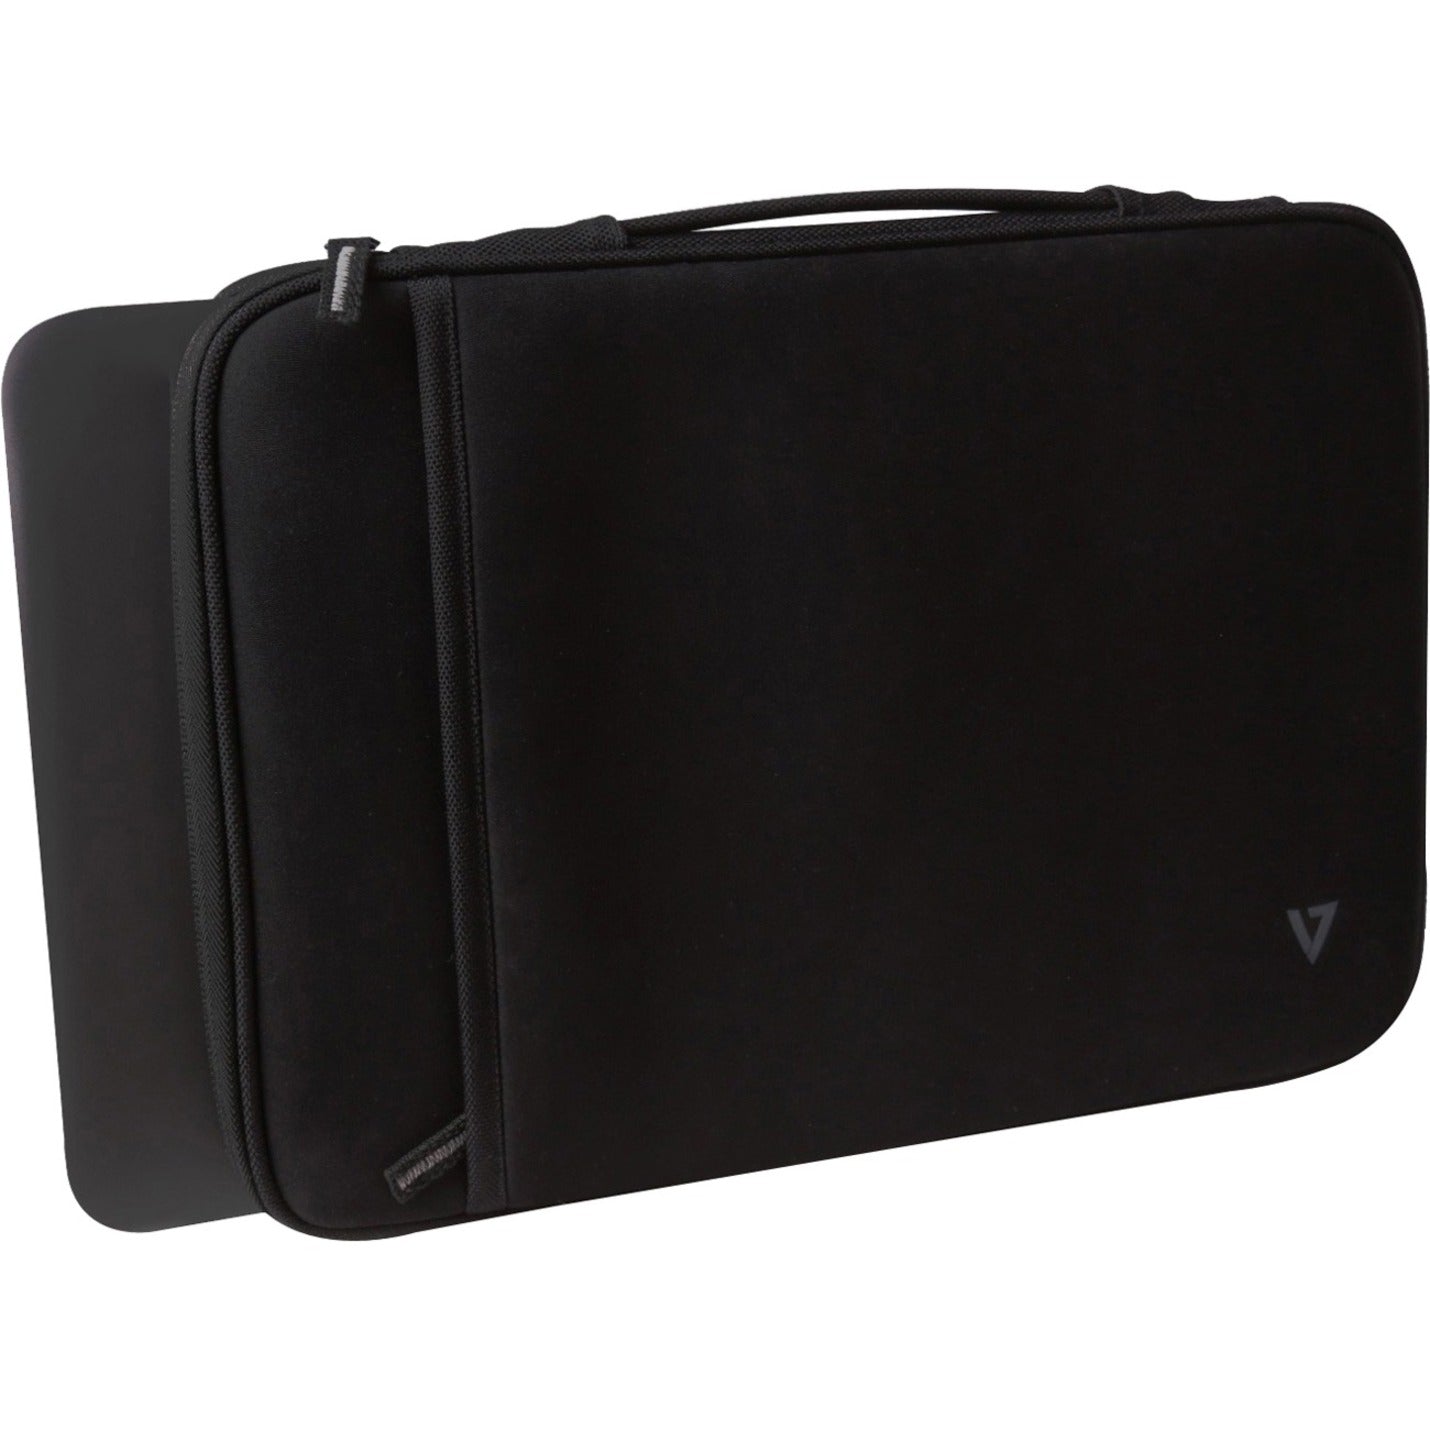 V7 CSE5H-BLK-9N Elite 11.6" Sleeve Case with Handle, Carrying Case for MacBook Air - Black